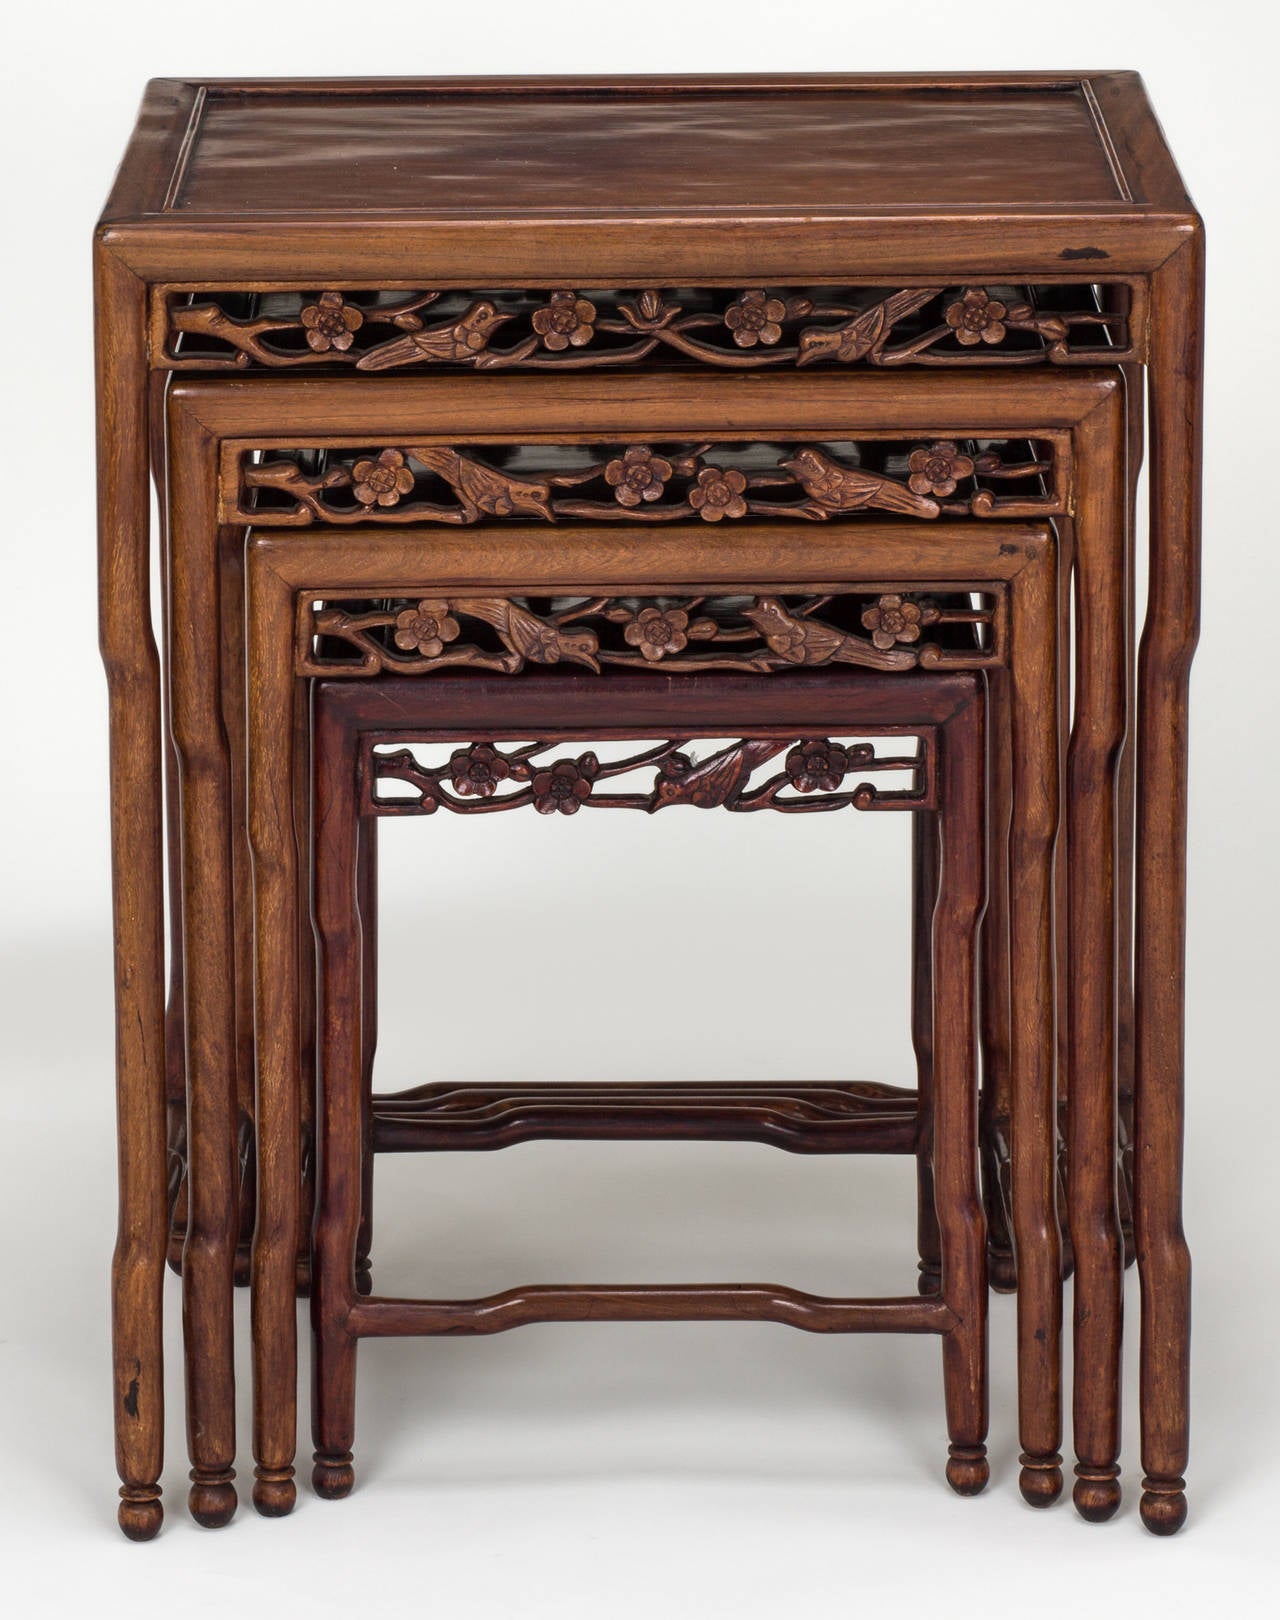 Lovely set of four Rosewood Chinese nesting tables from 1940s.  
Each table is nicely detailed.  Delicately carved apron front with cherry blossoms and birds.
List of dimensions:
1st (Largest) table = 14D x 19W x 24.5h
2nd table = 12.75D x 16.5W